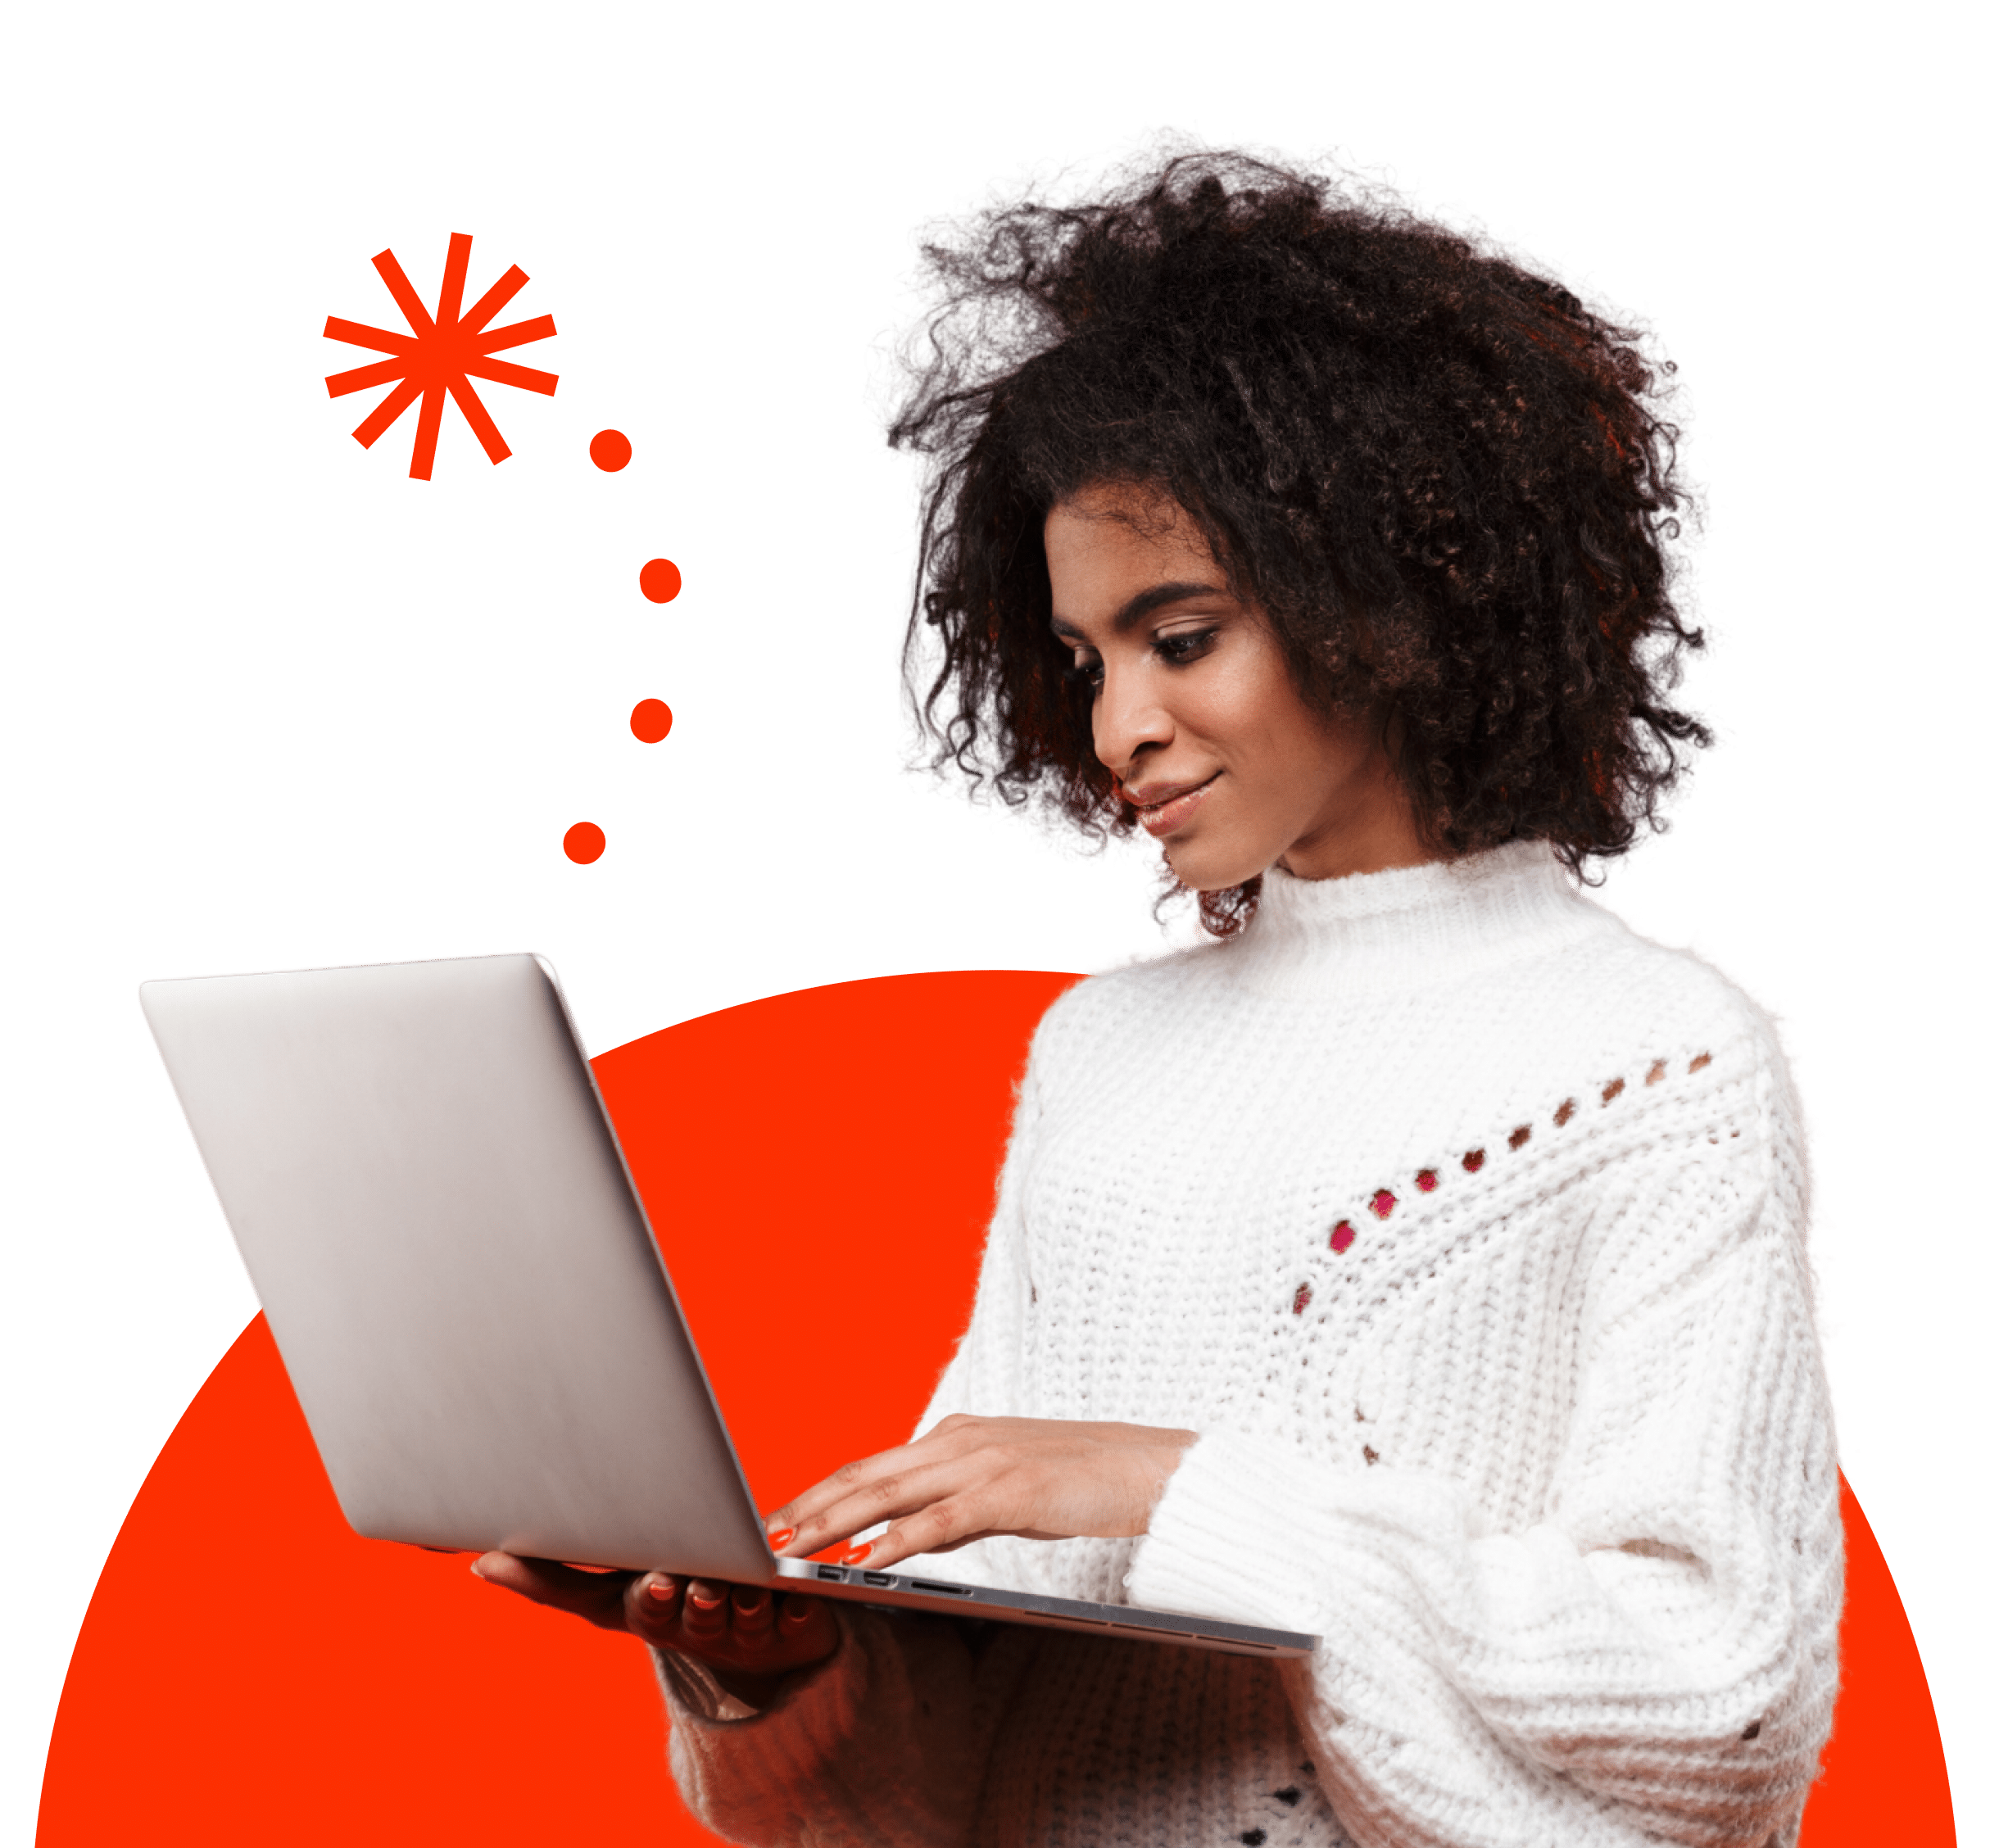 Black woman looking at her laptop, with red/orange graphics in the background.